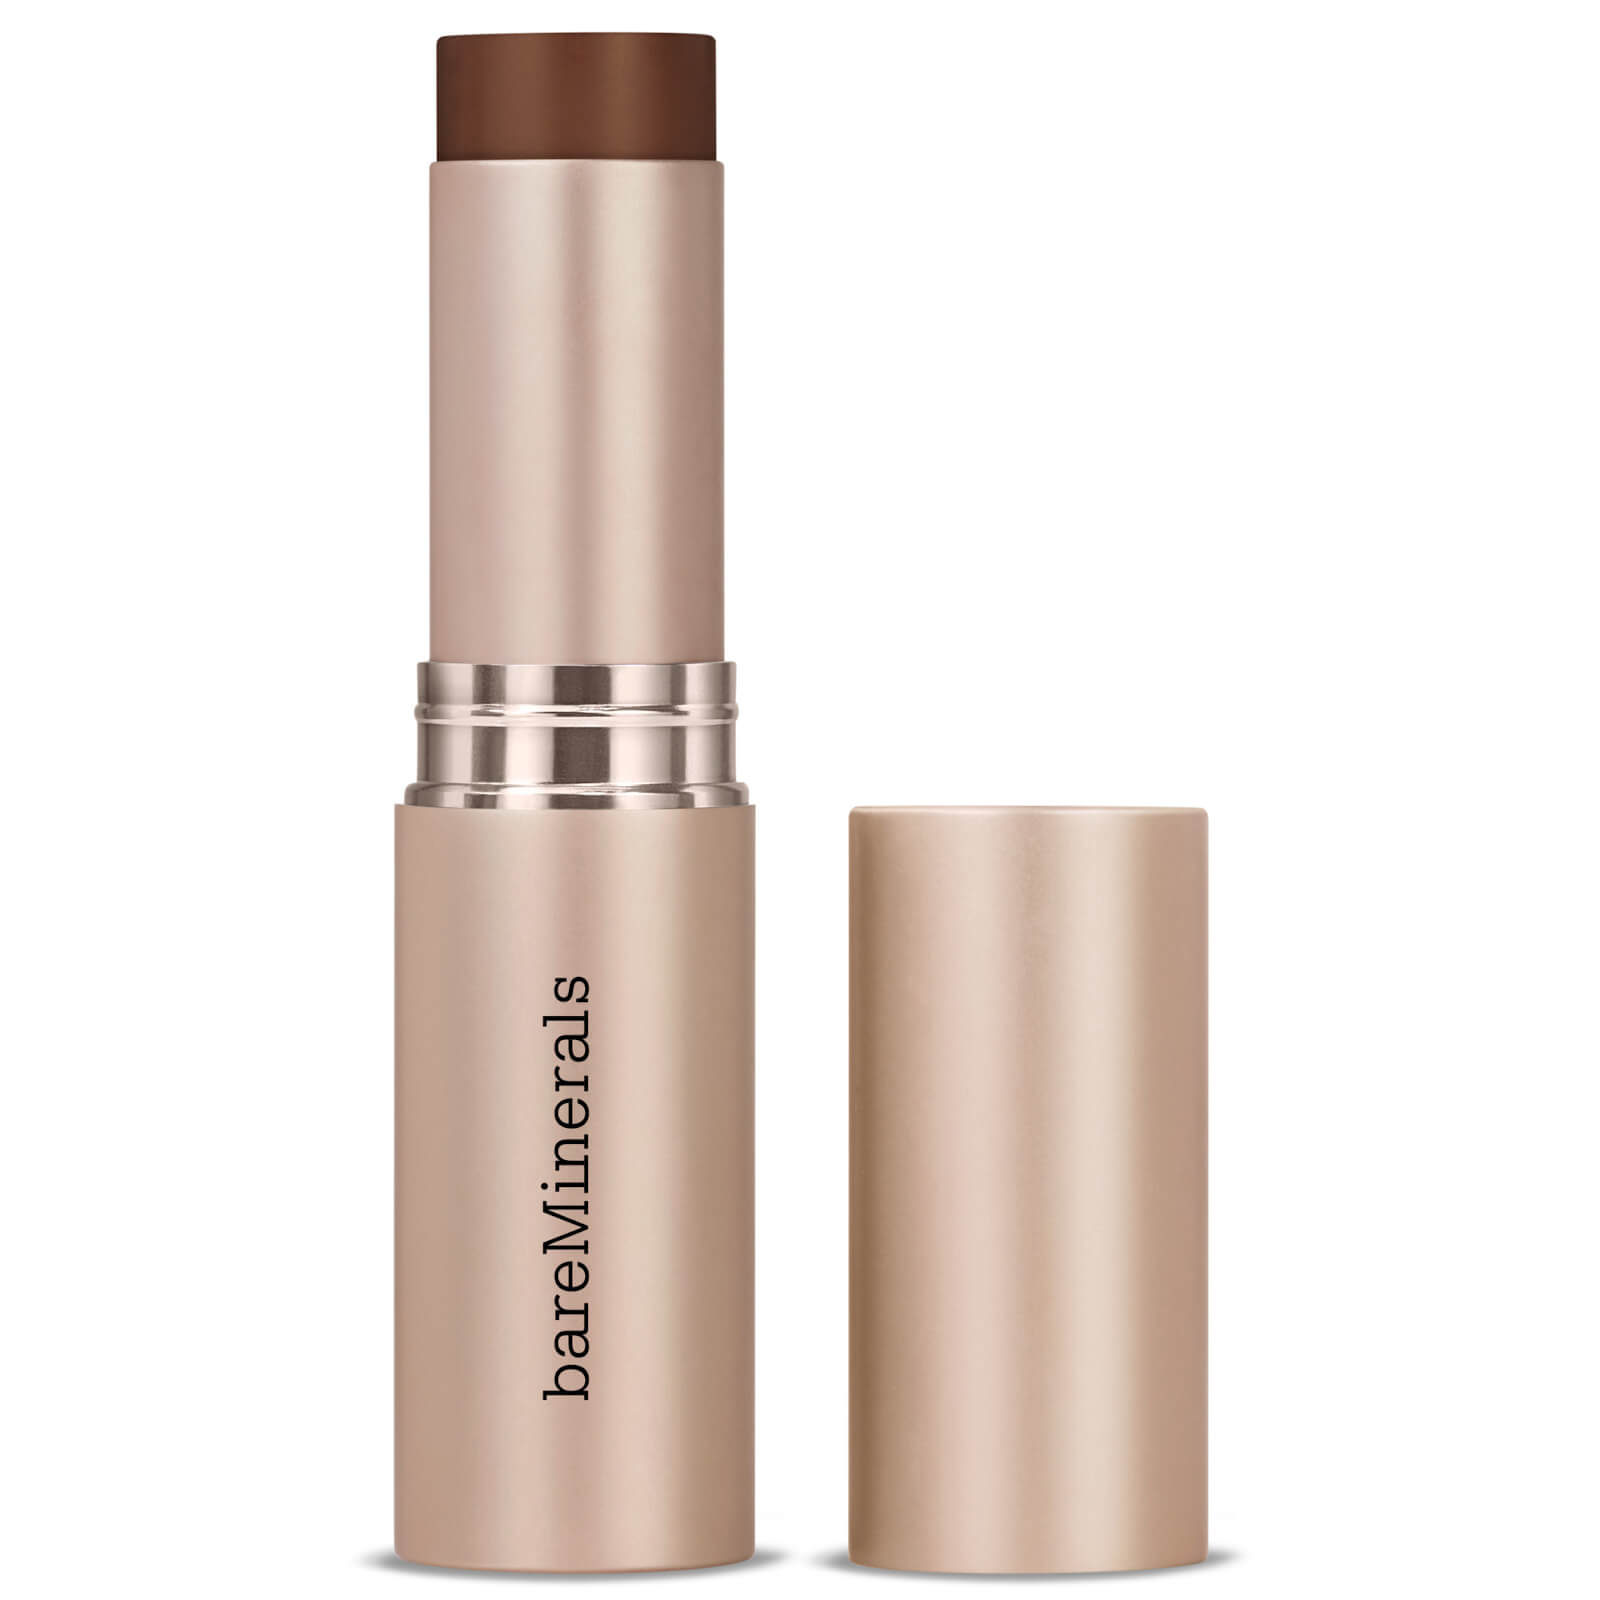 bareMinerals Complexion Rescue Hydrating SPF25 Foundation Stick 10g (Various Shades) - Mahogany 6N